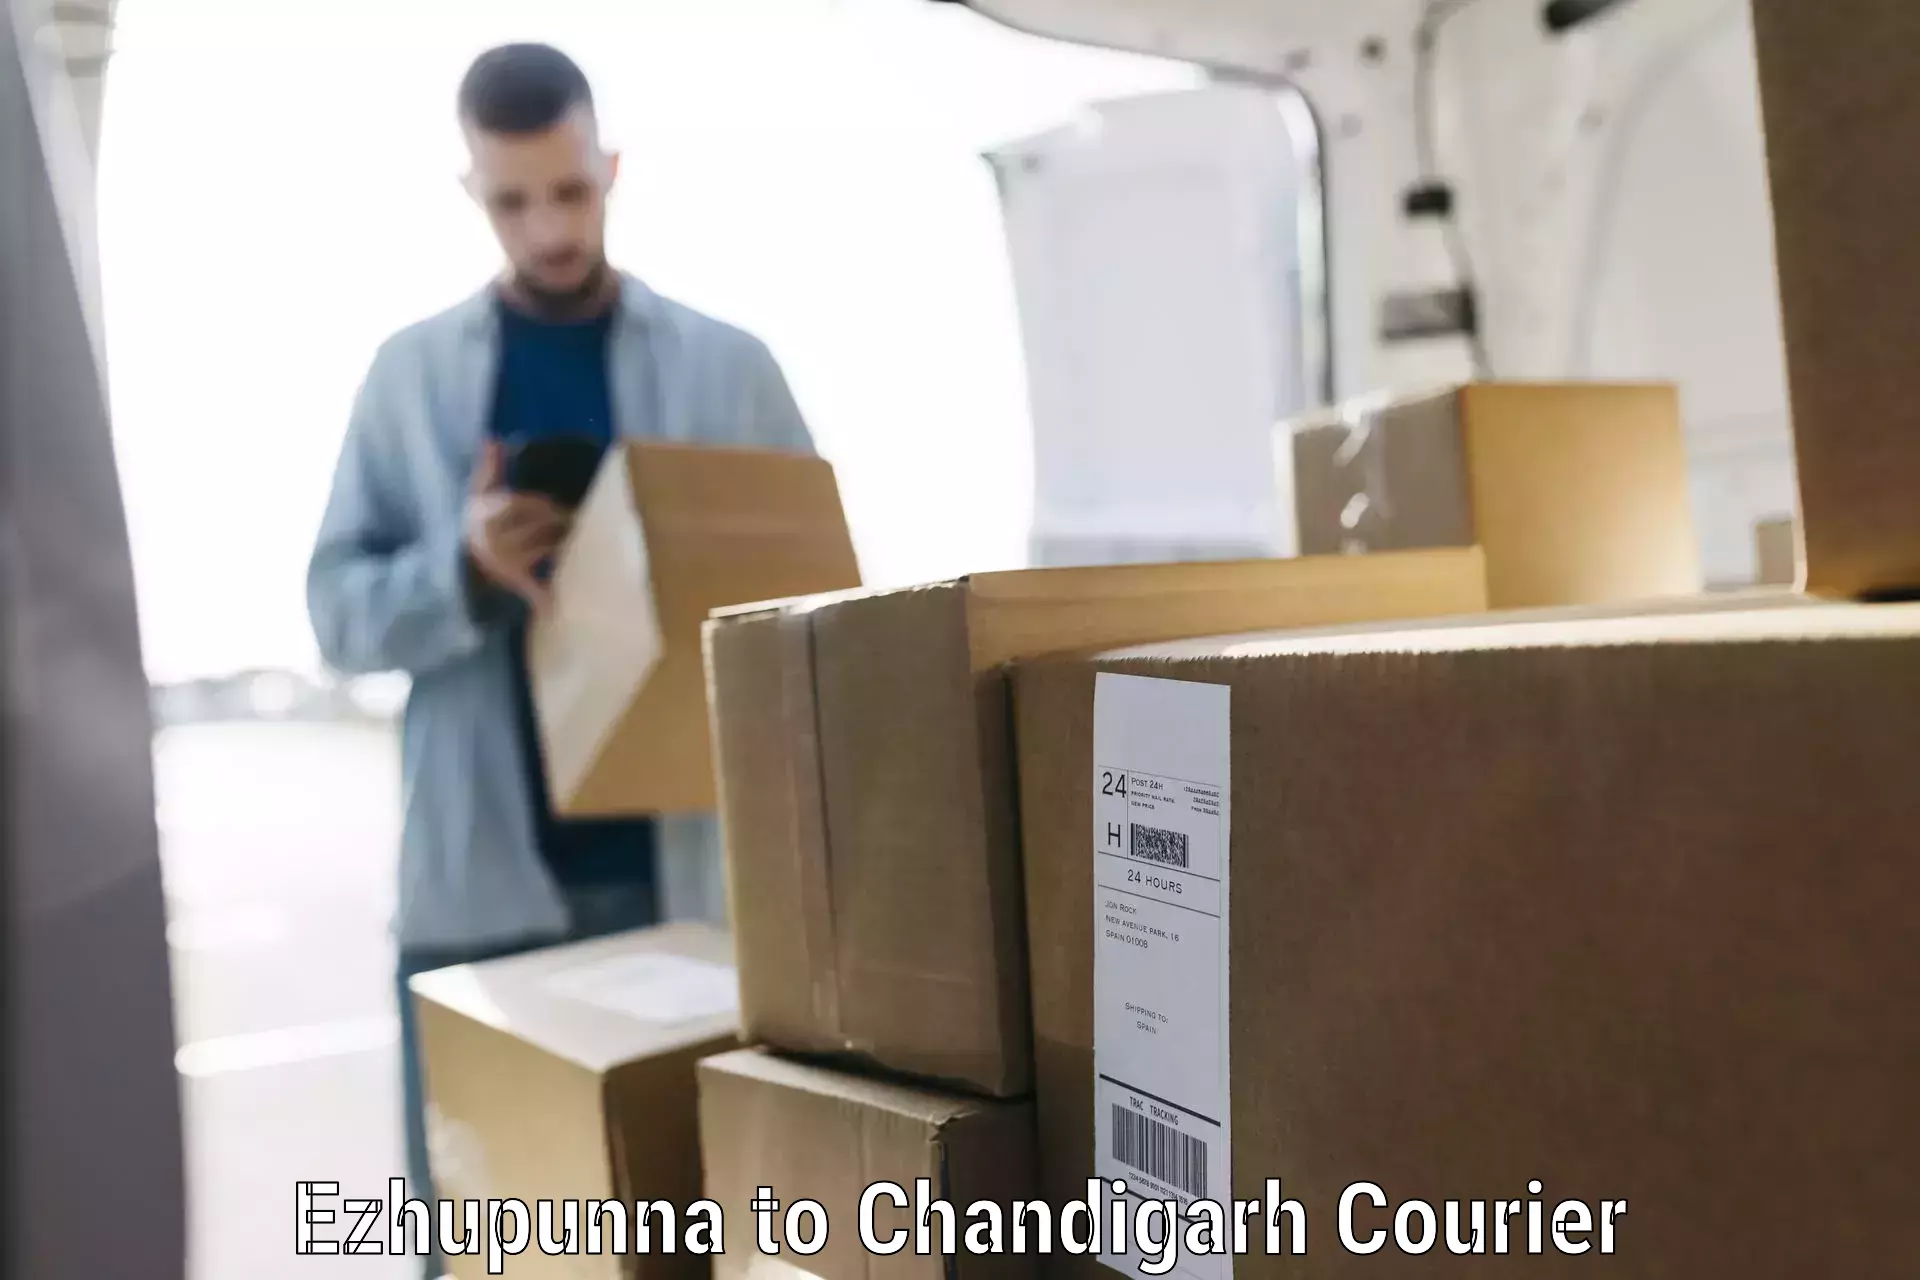 Personal effects shipping in Ezhupunna to Chandigarh